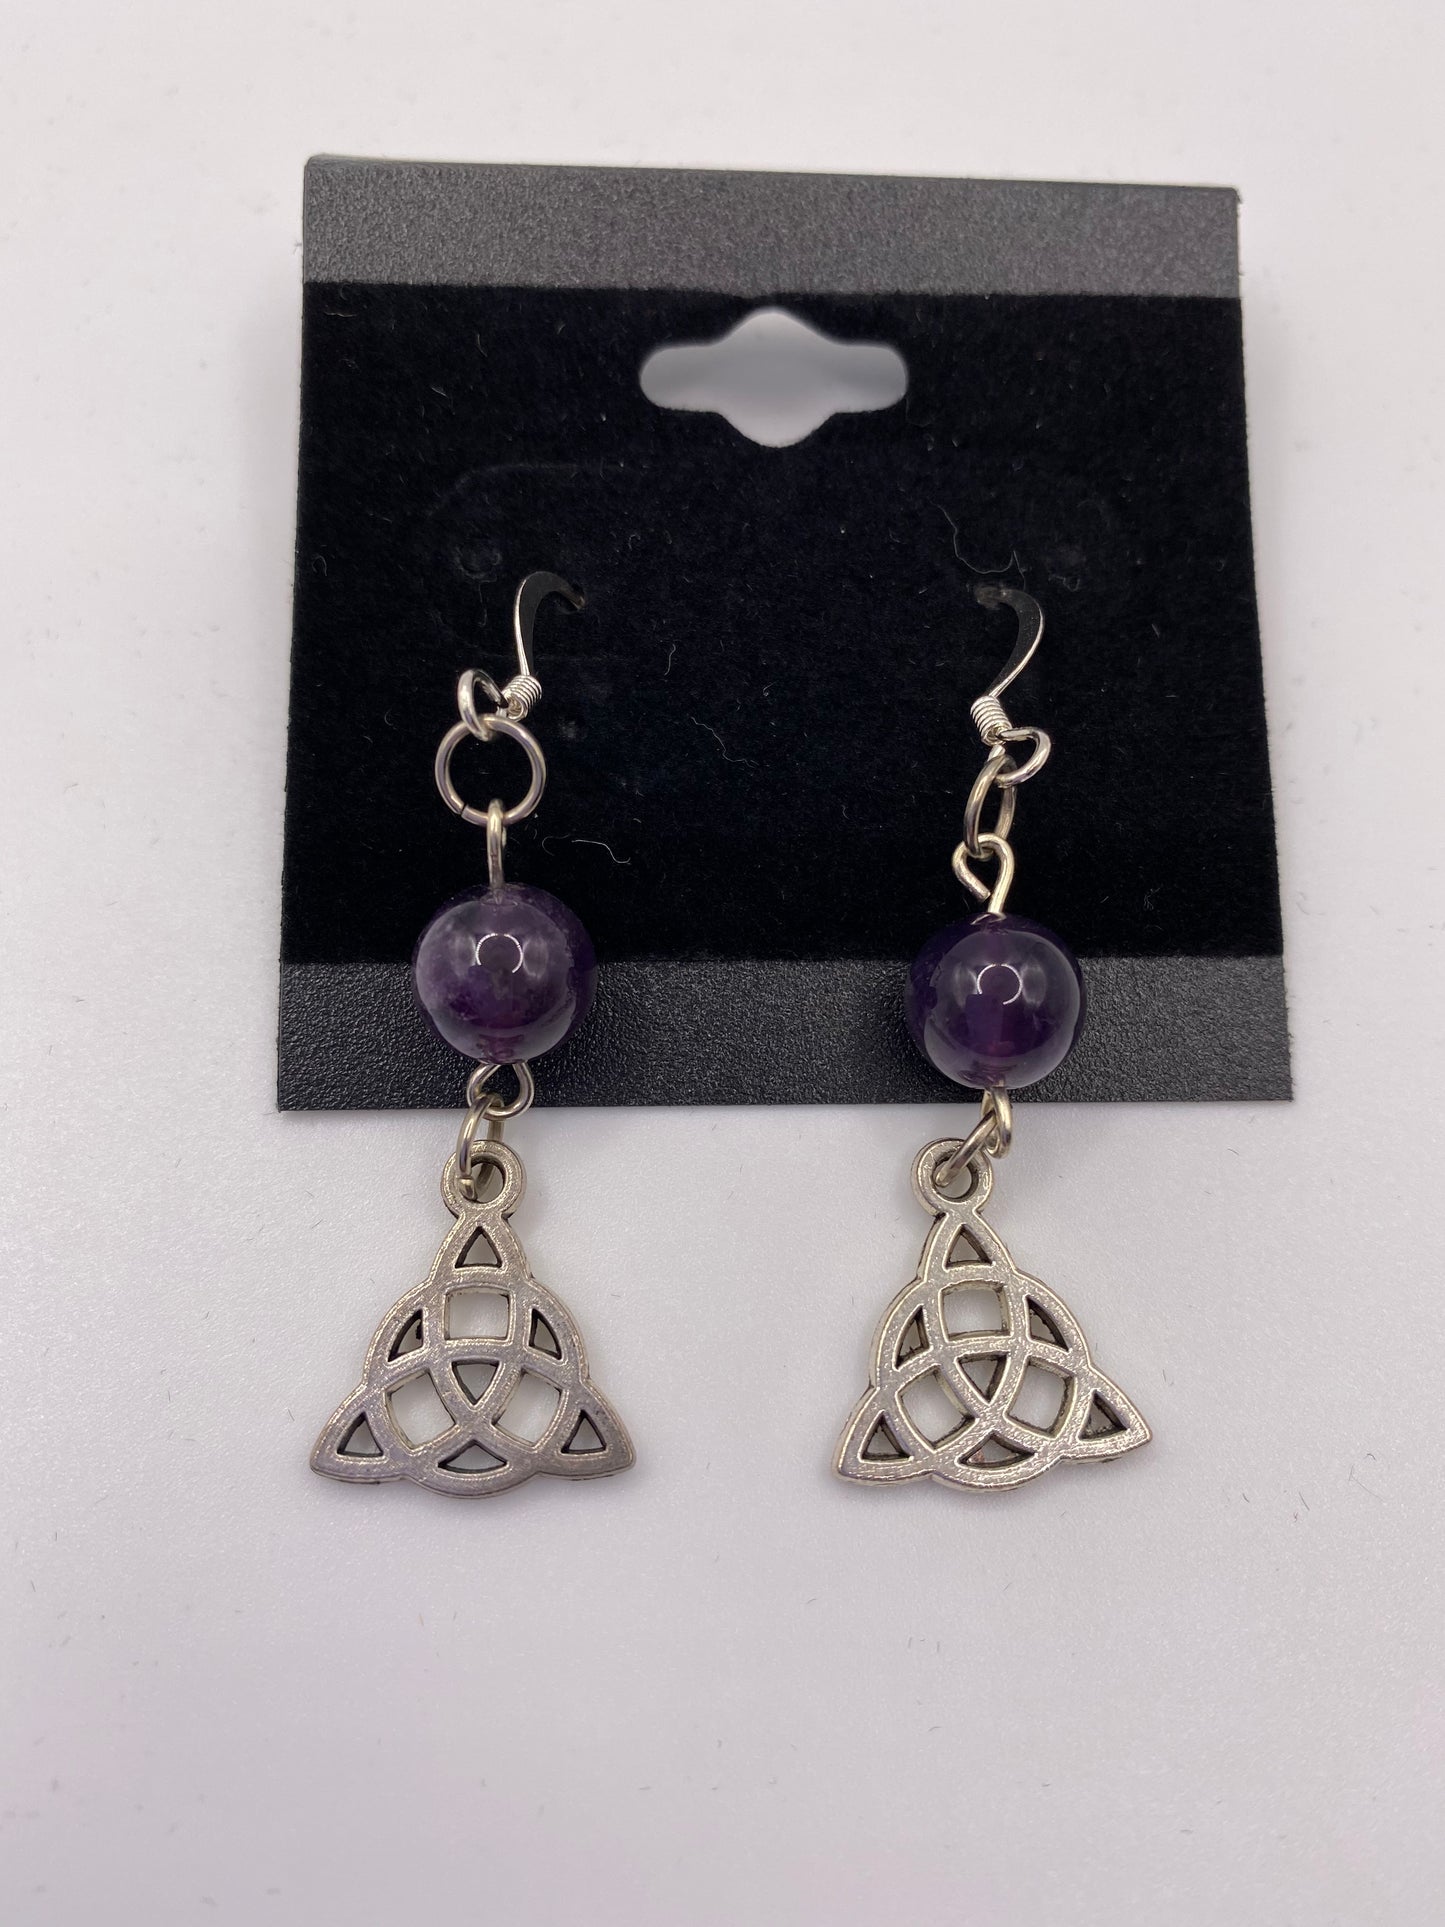 Celtic Knot Earrings with Semi-Precious Stones